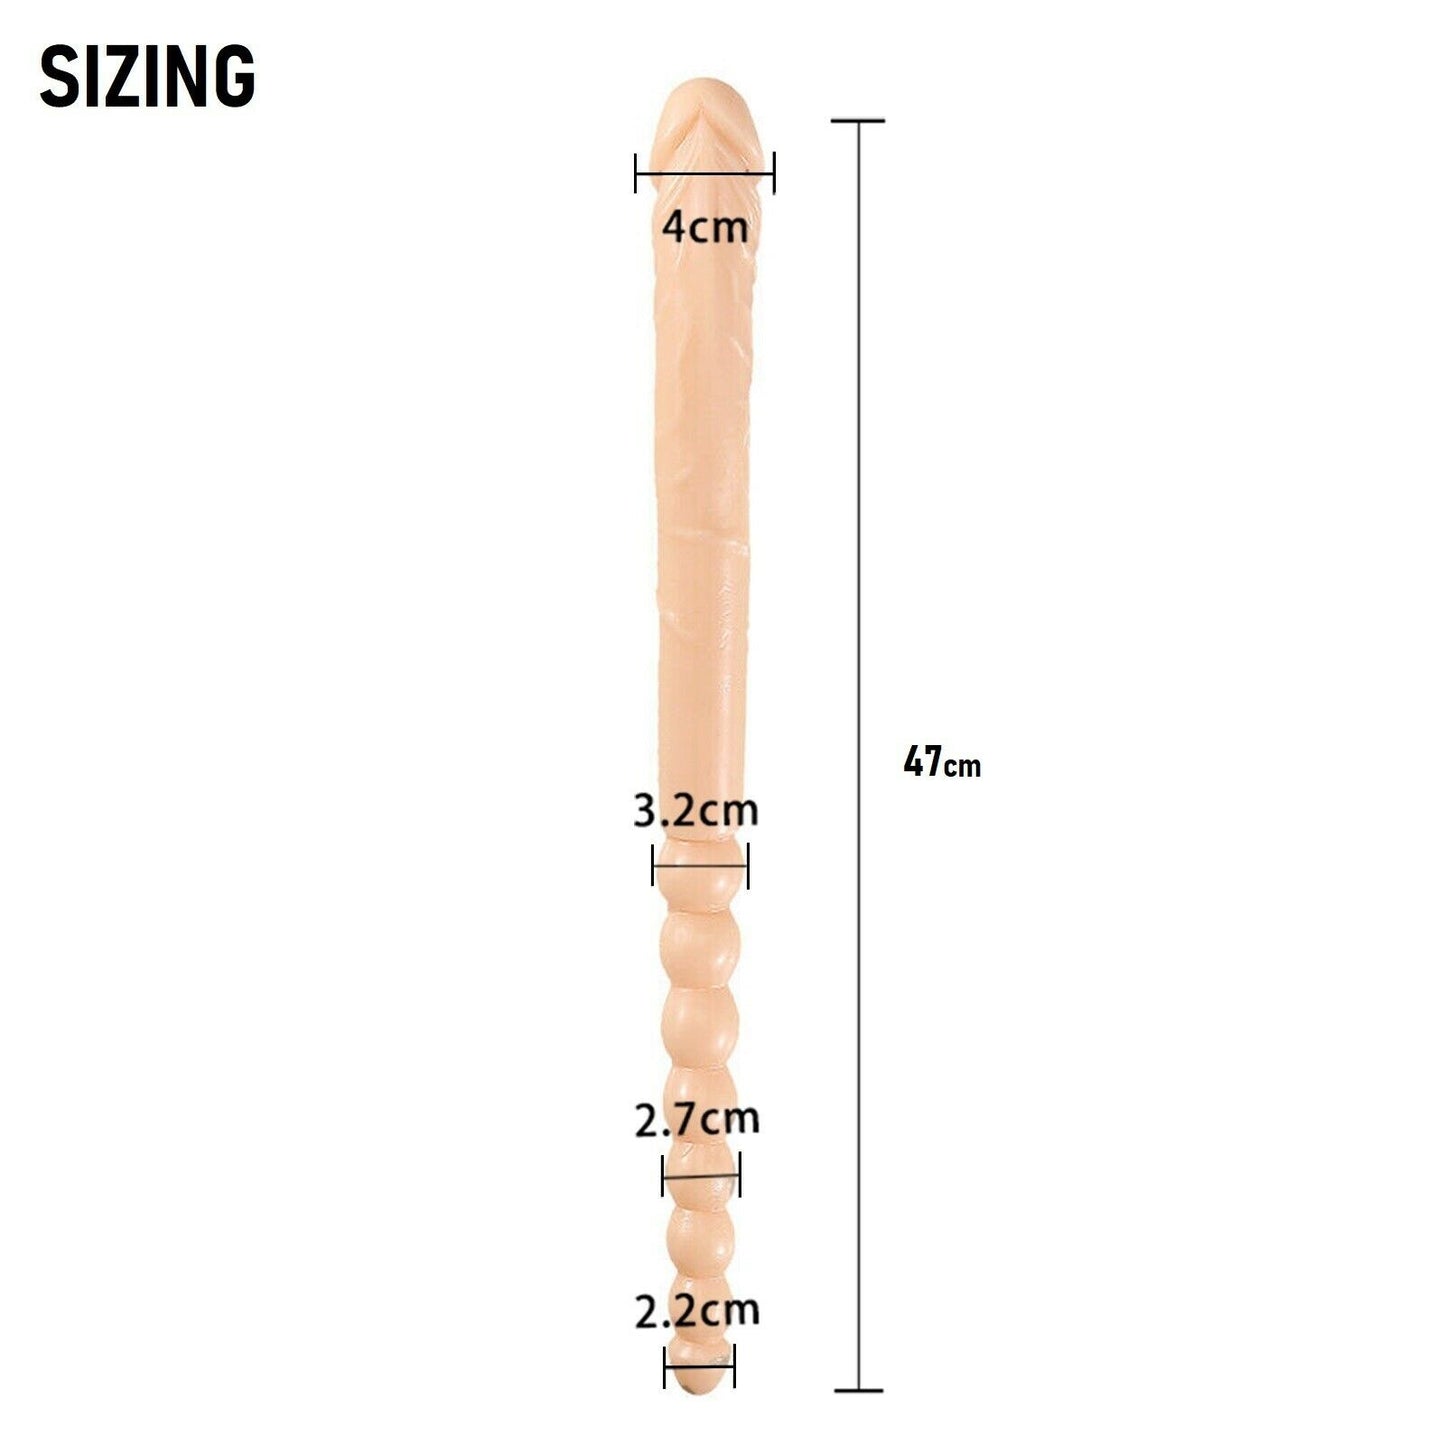 47cm Double Ended Crystal Anal Beads Dildo Dong Penis Lesbian Adult Sex Toy New